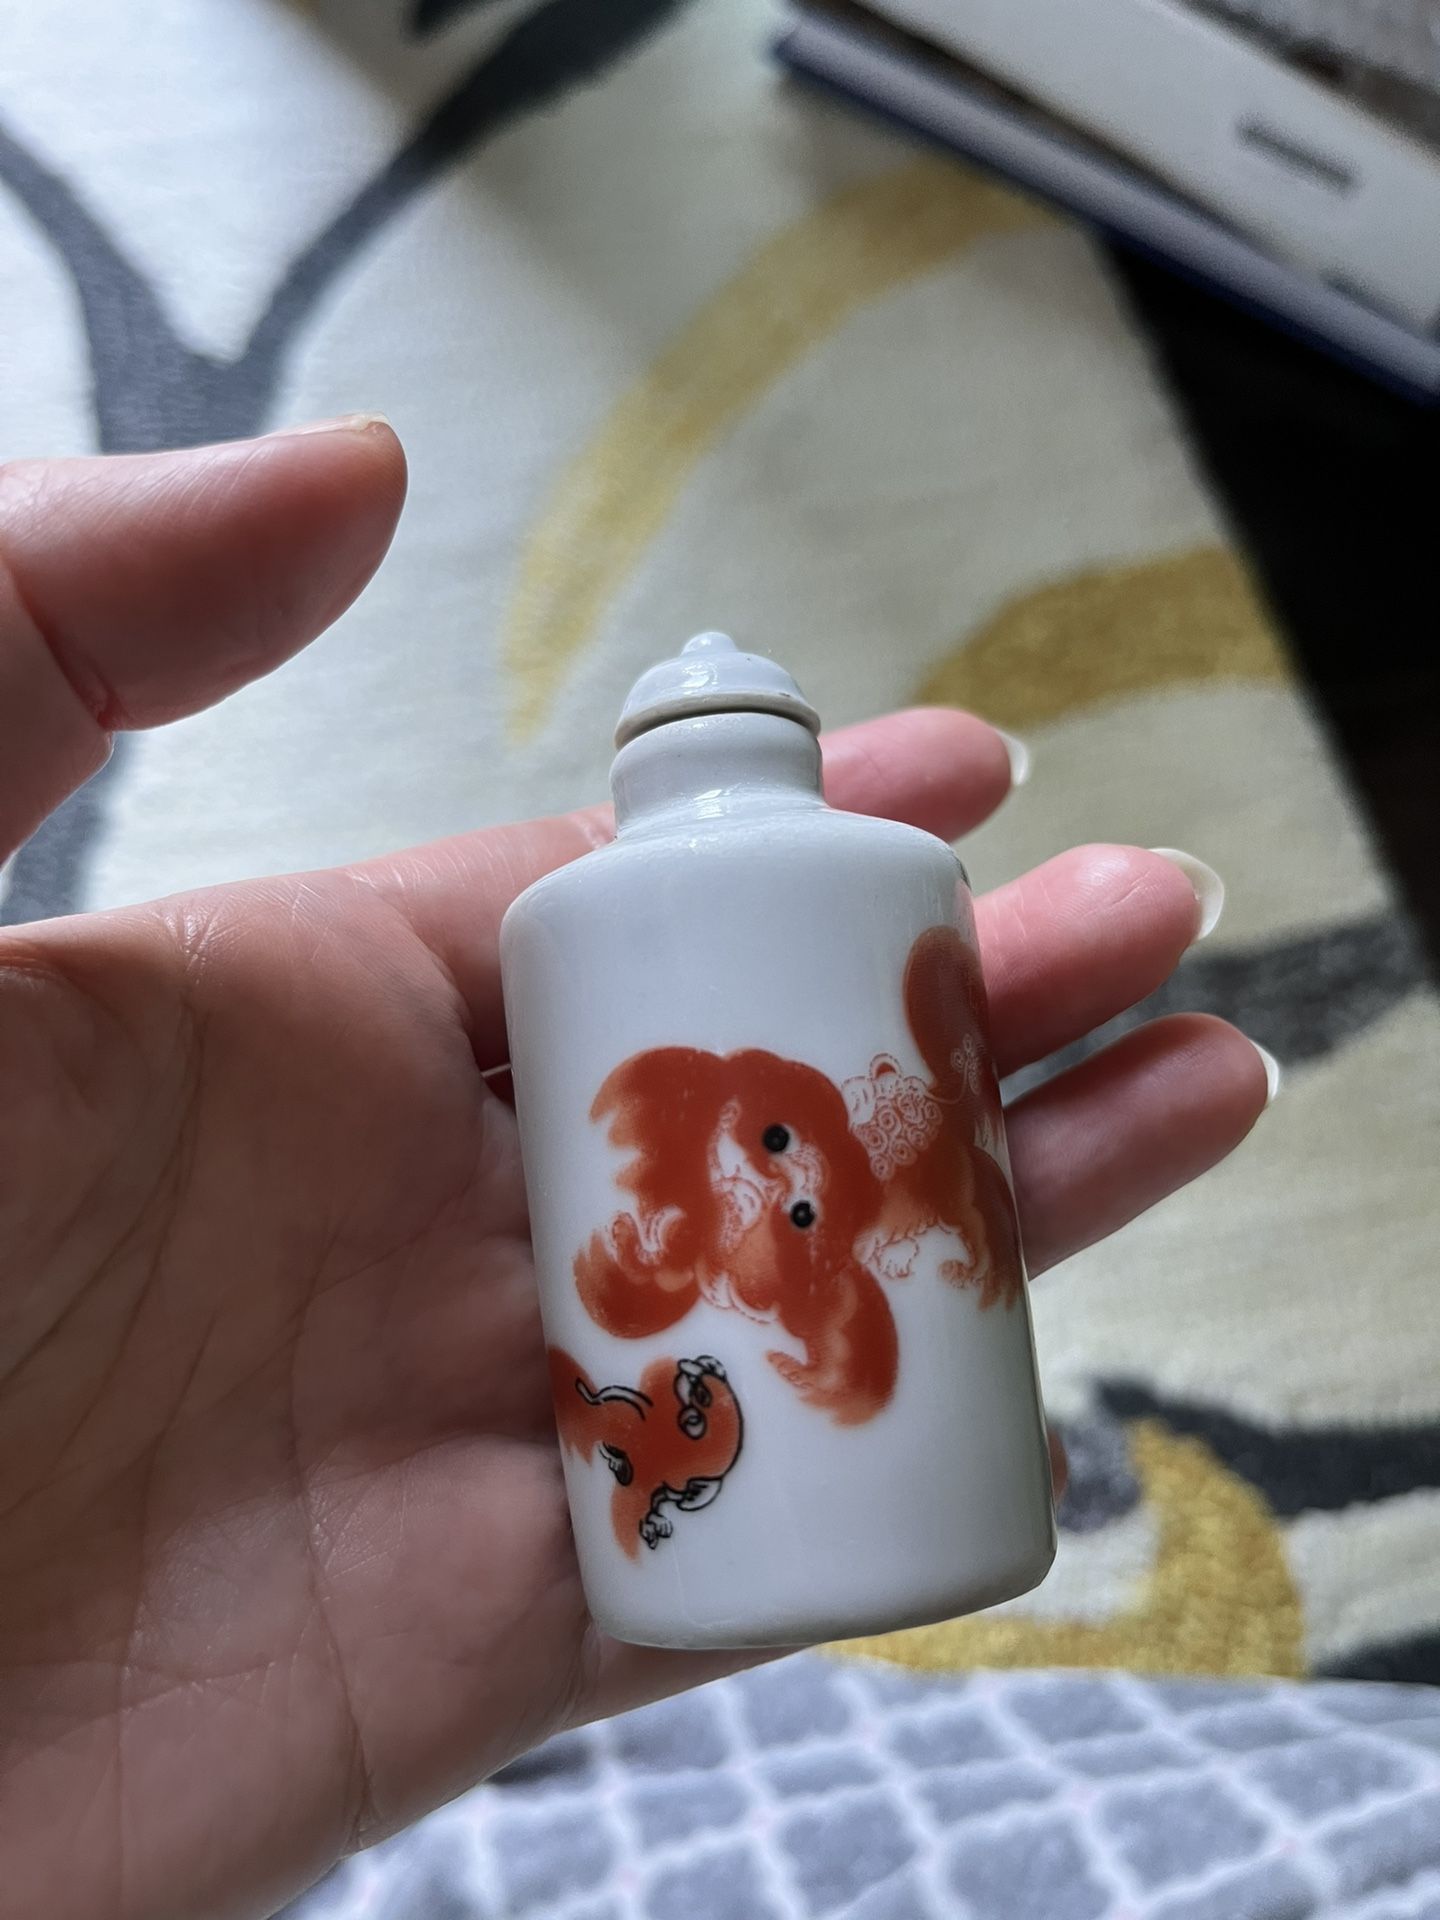 Chinese Antique Snuff Bottle